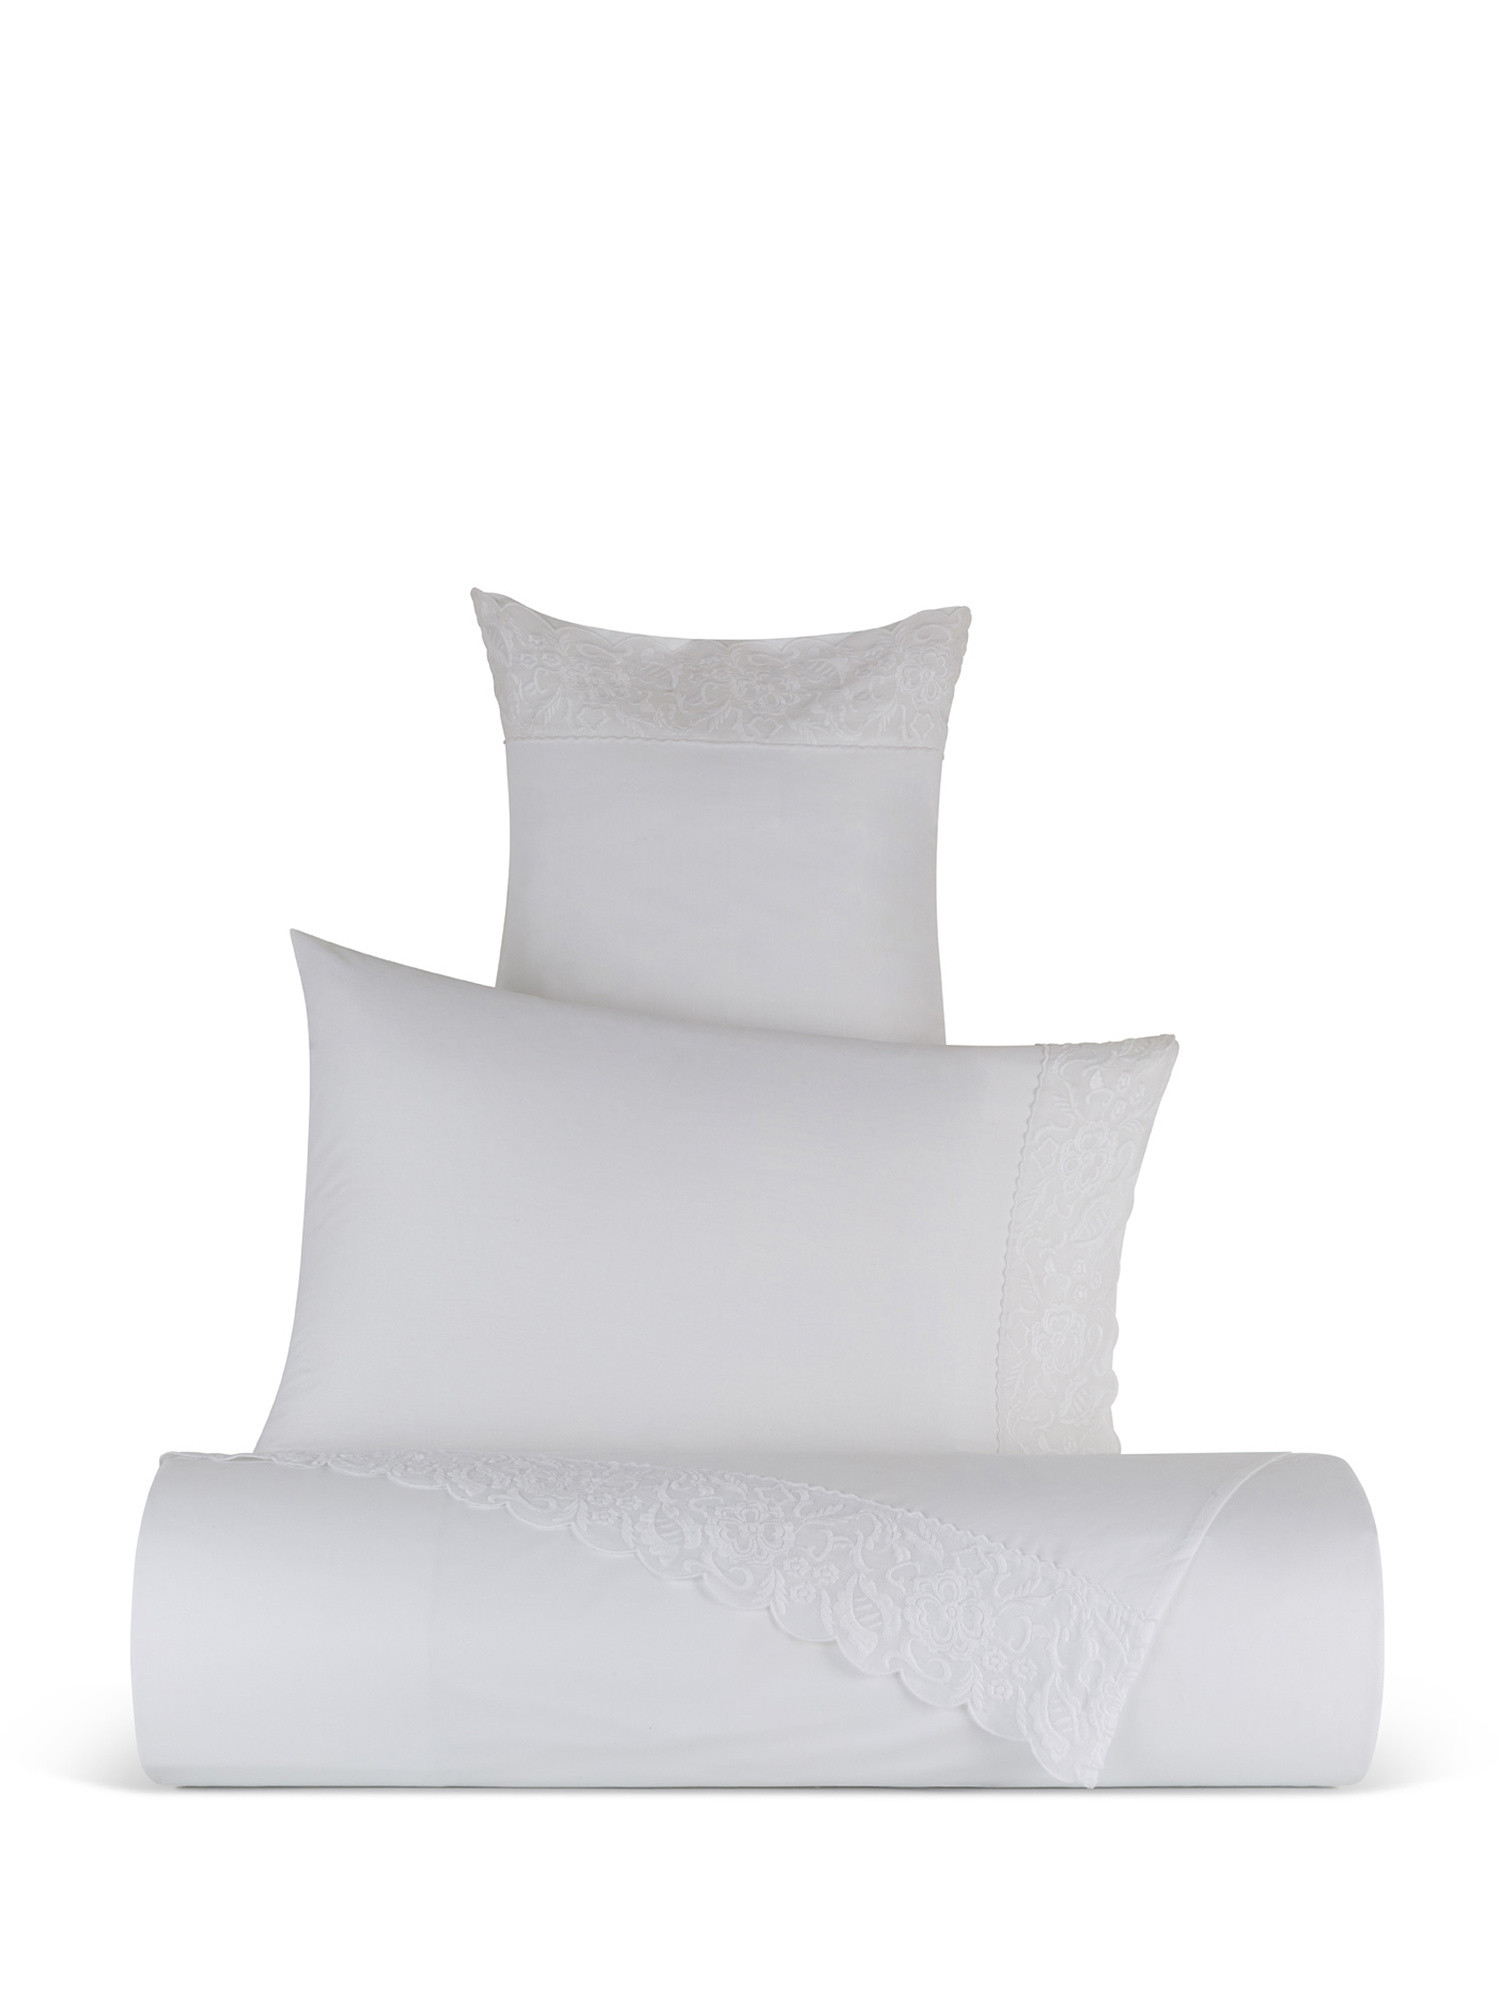 Portofino flat sheet in 100% cotton percale with lace, White, large image number 0